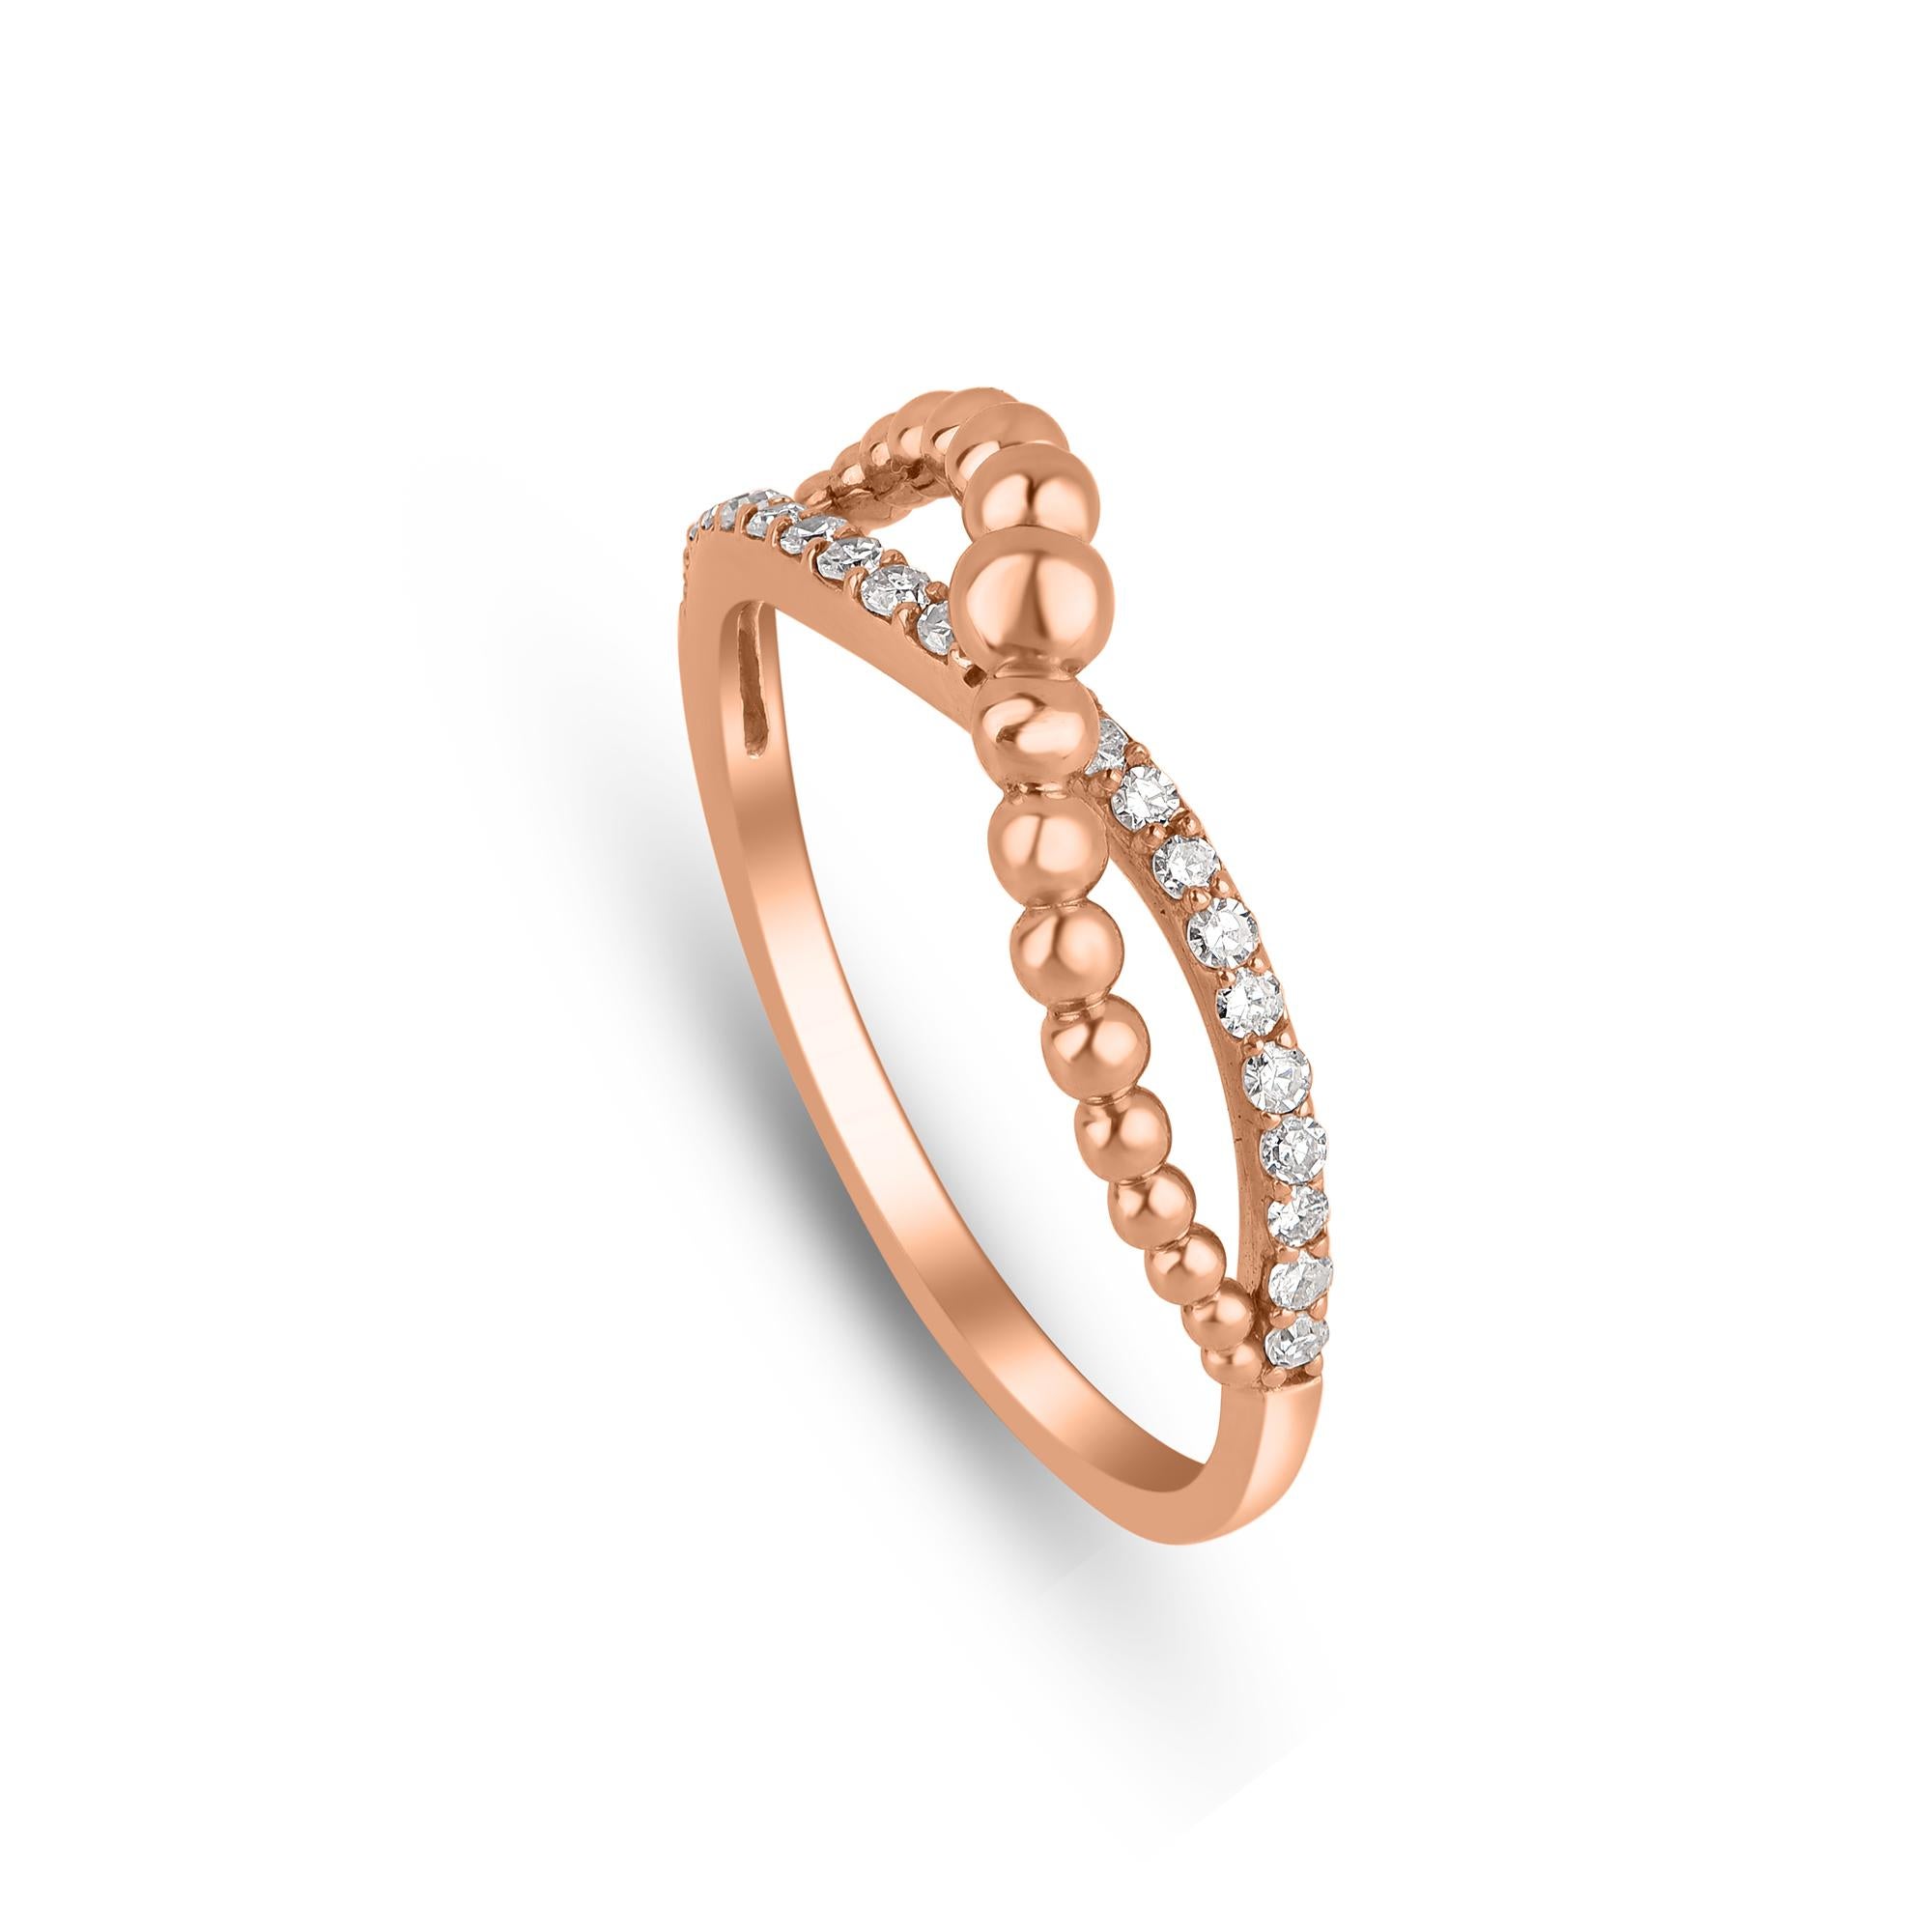 Classic and contemporary – this diamond bubble ring is embellished with 20 round-cut diamonds in prong setting and crafted beautifully in 18 kt rose gold. Diamonds are graded HI color, I1 clarity. 